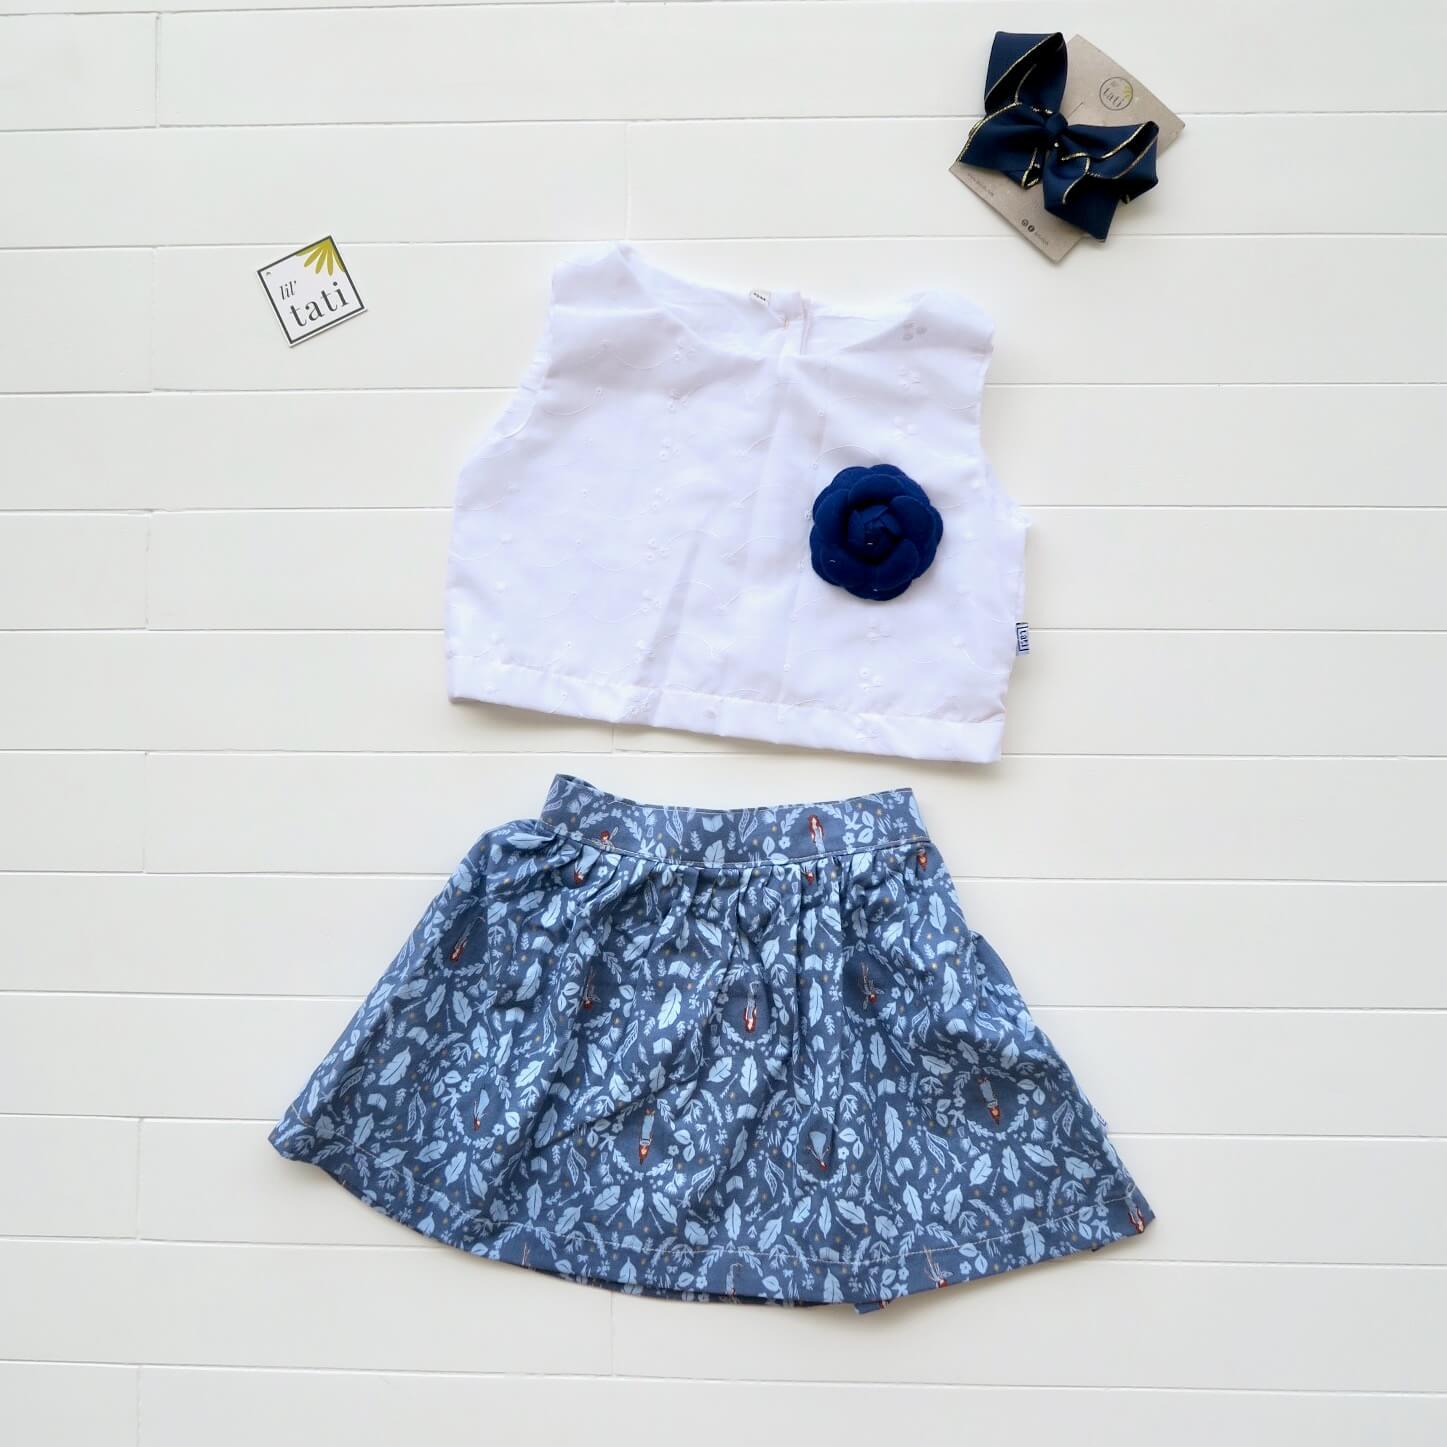 Sage Top and Skirt in White Eyelet and Fairy Tale Blue - Lil' Tati